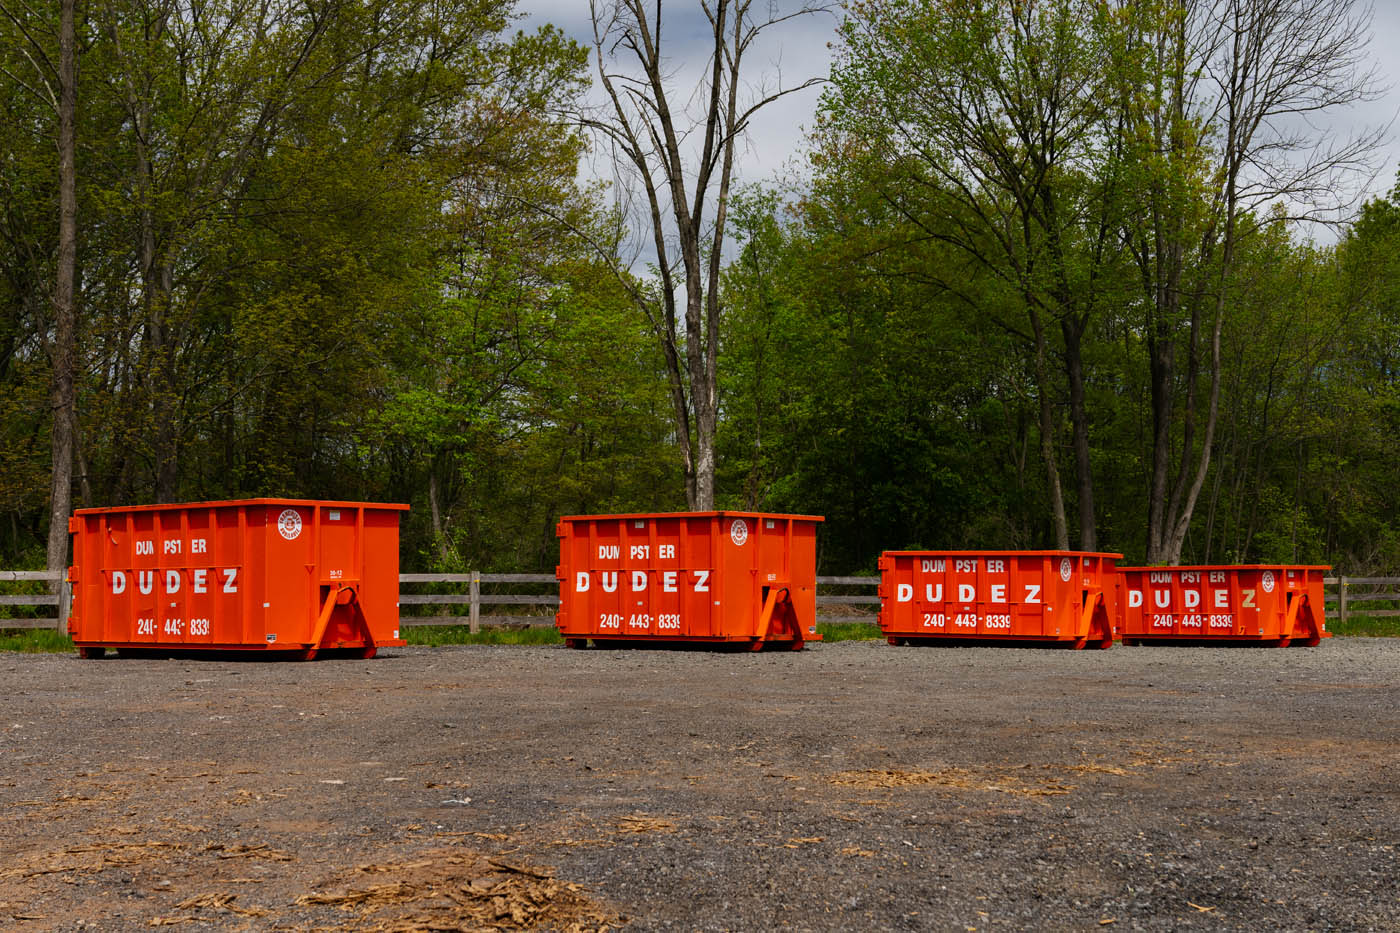 Multiple Dumpster Dudez rental dumpster sizes - learn how we can streamline your project with Reading / Berks County garbage haulers.